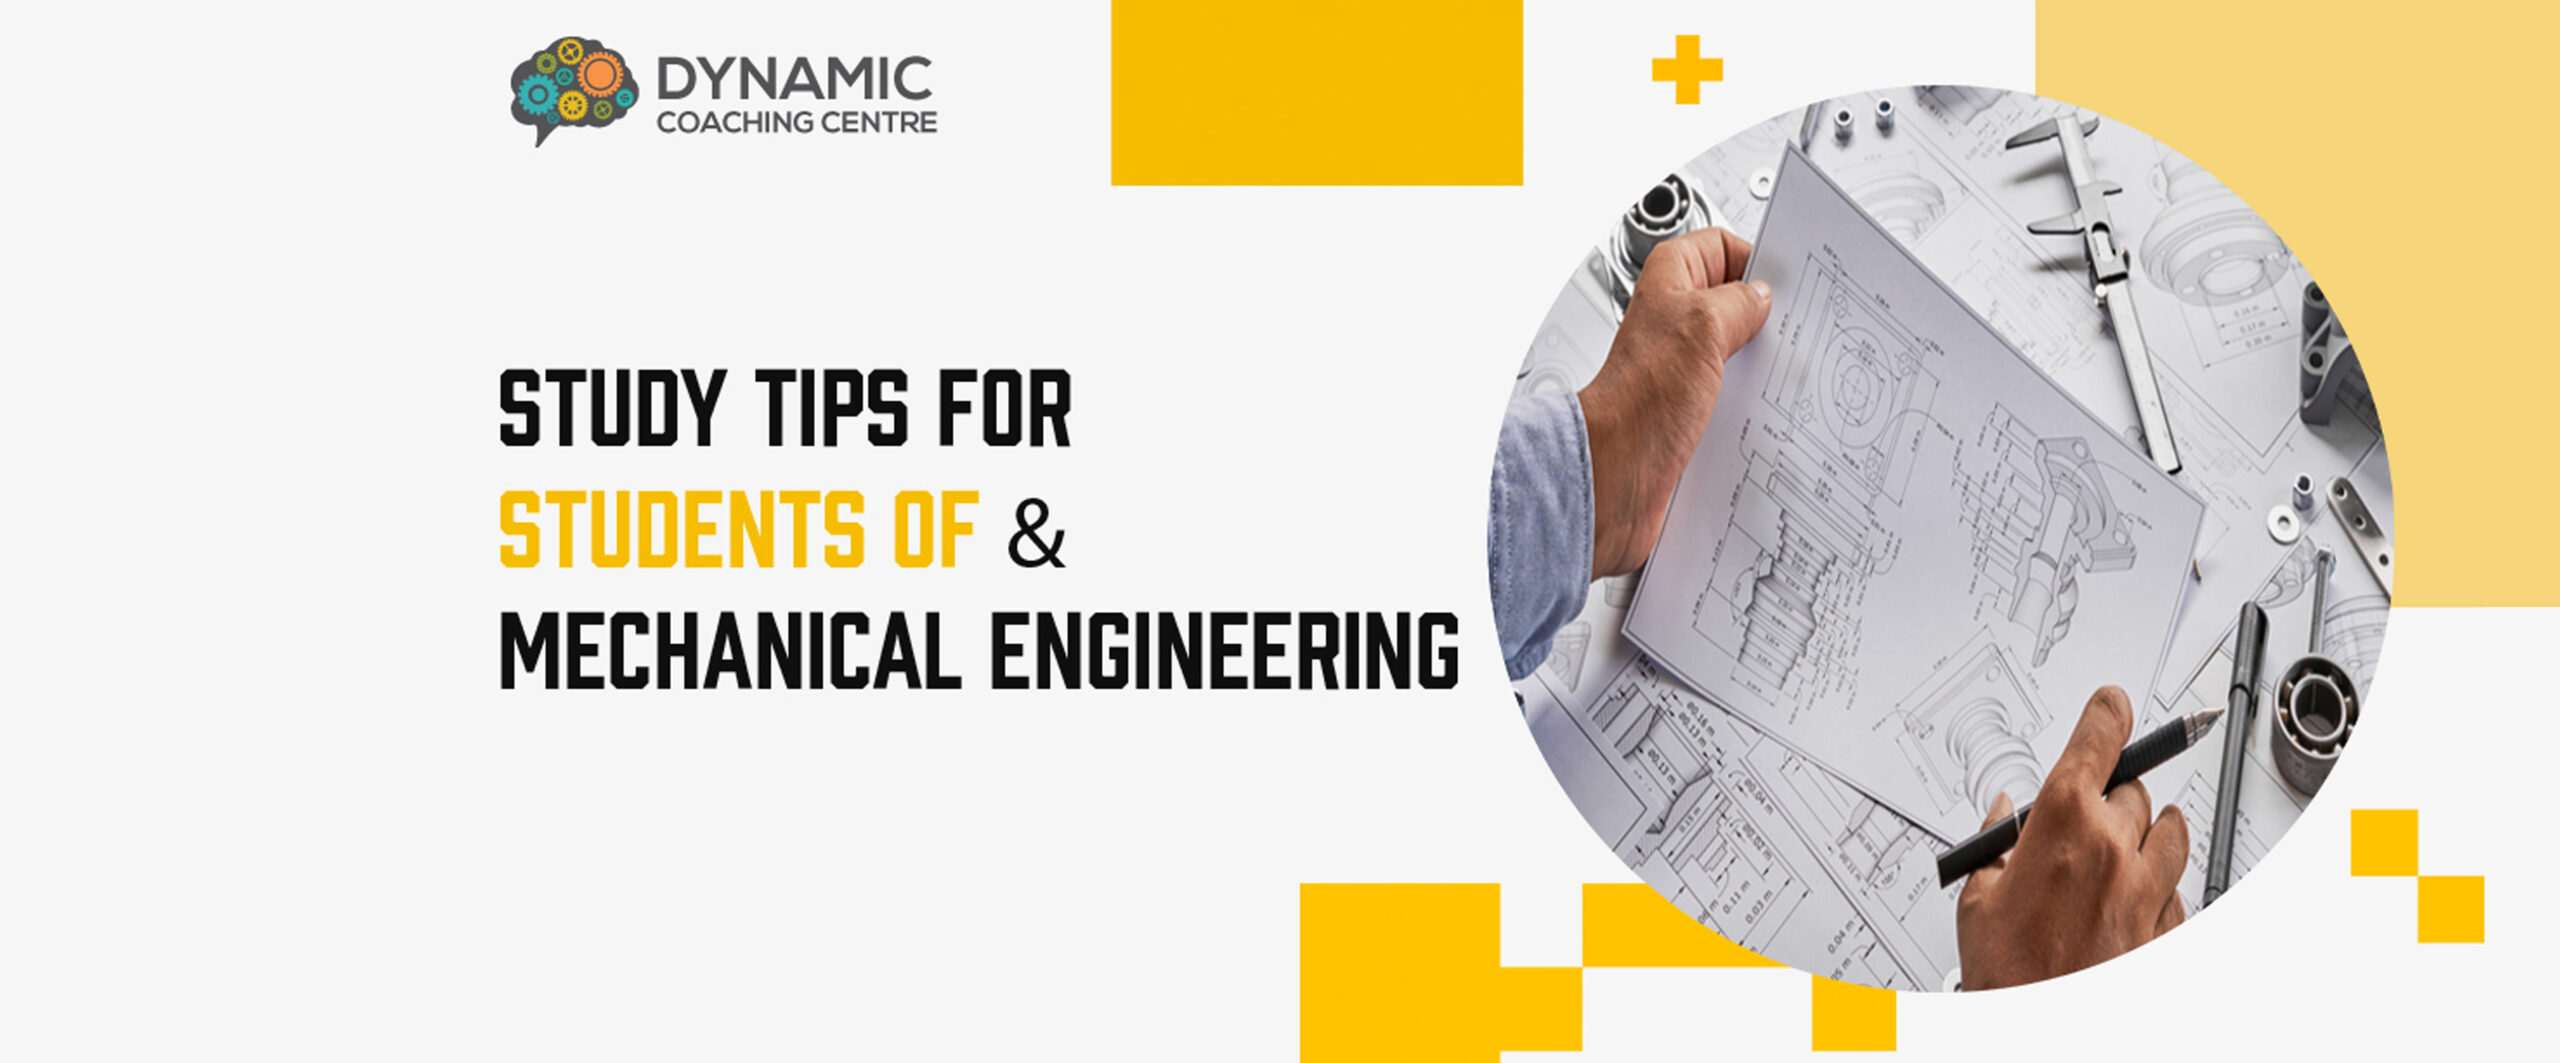 Study tips for students of mechanical engineering